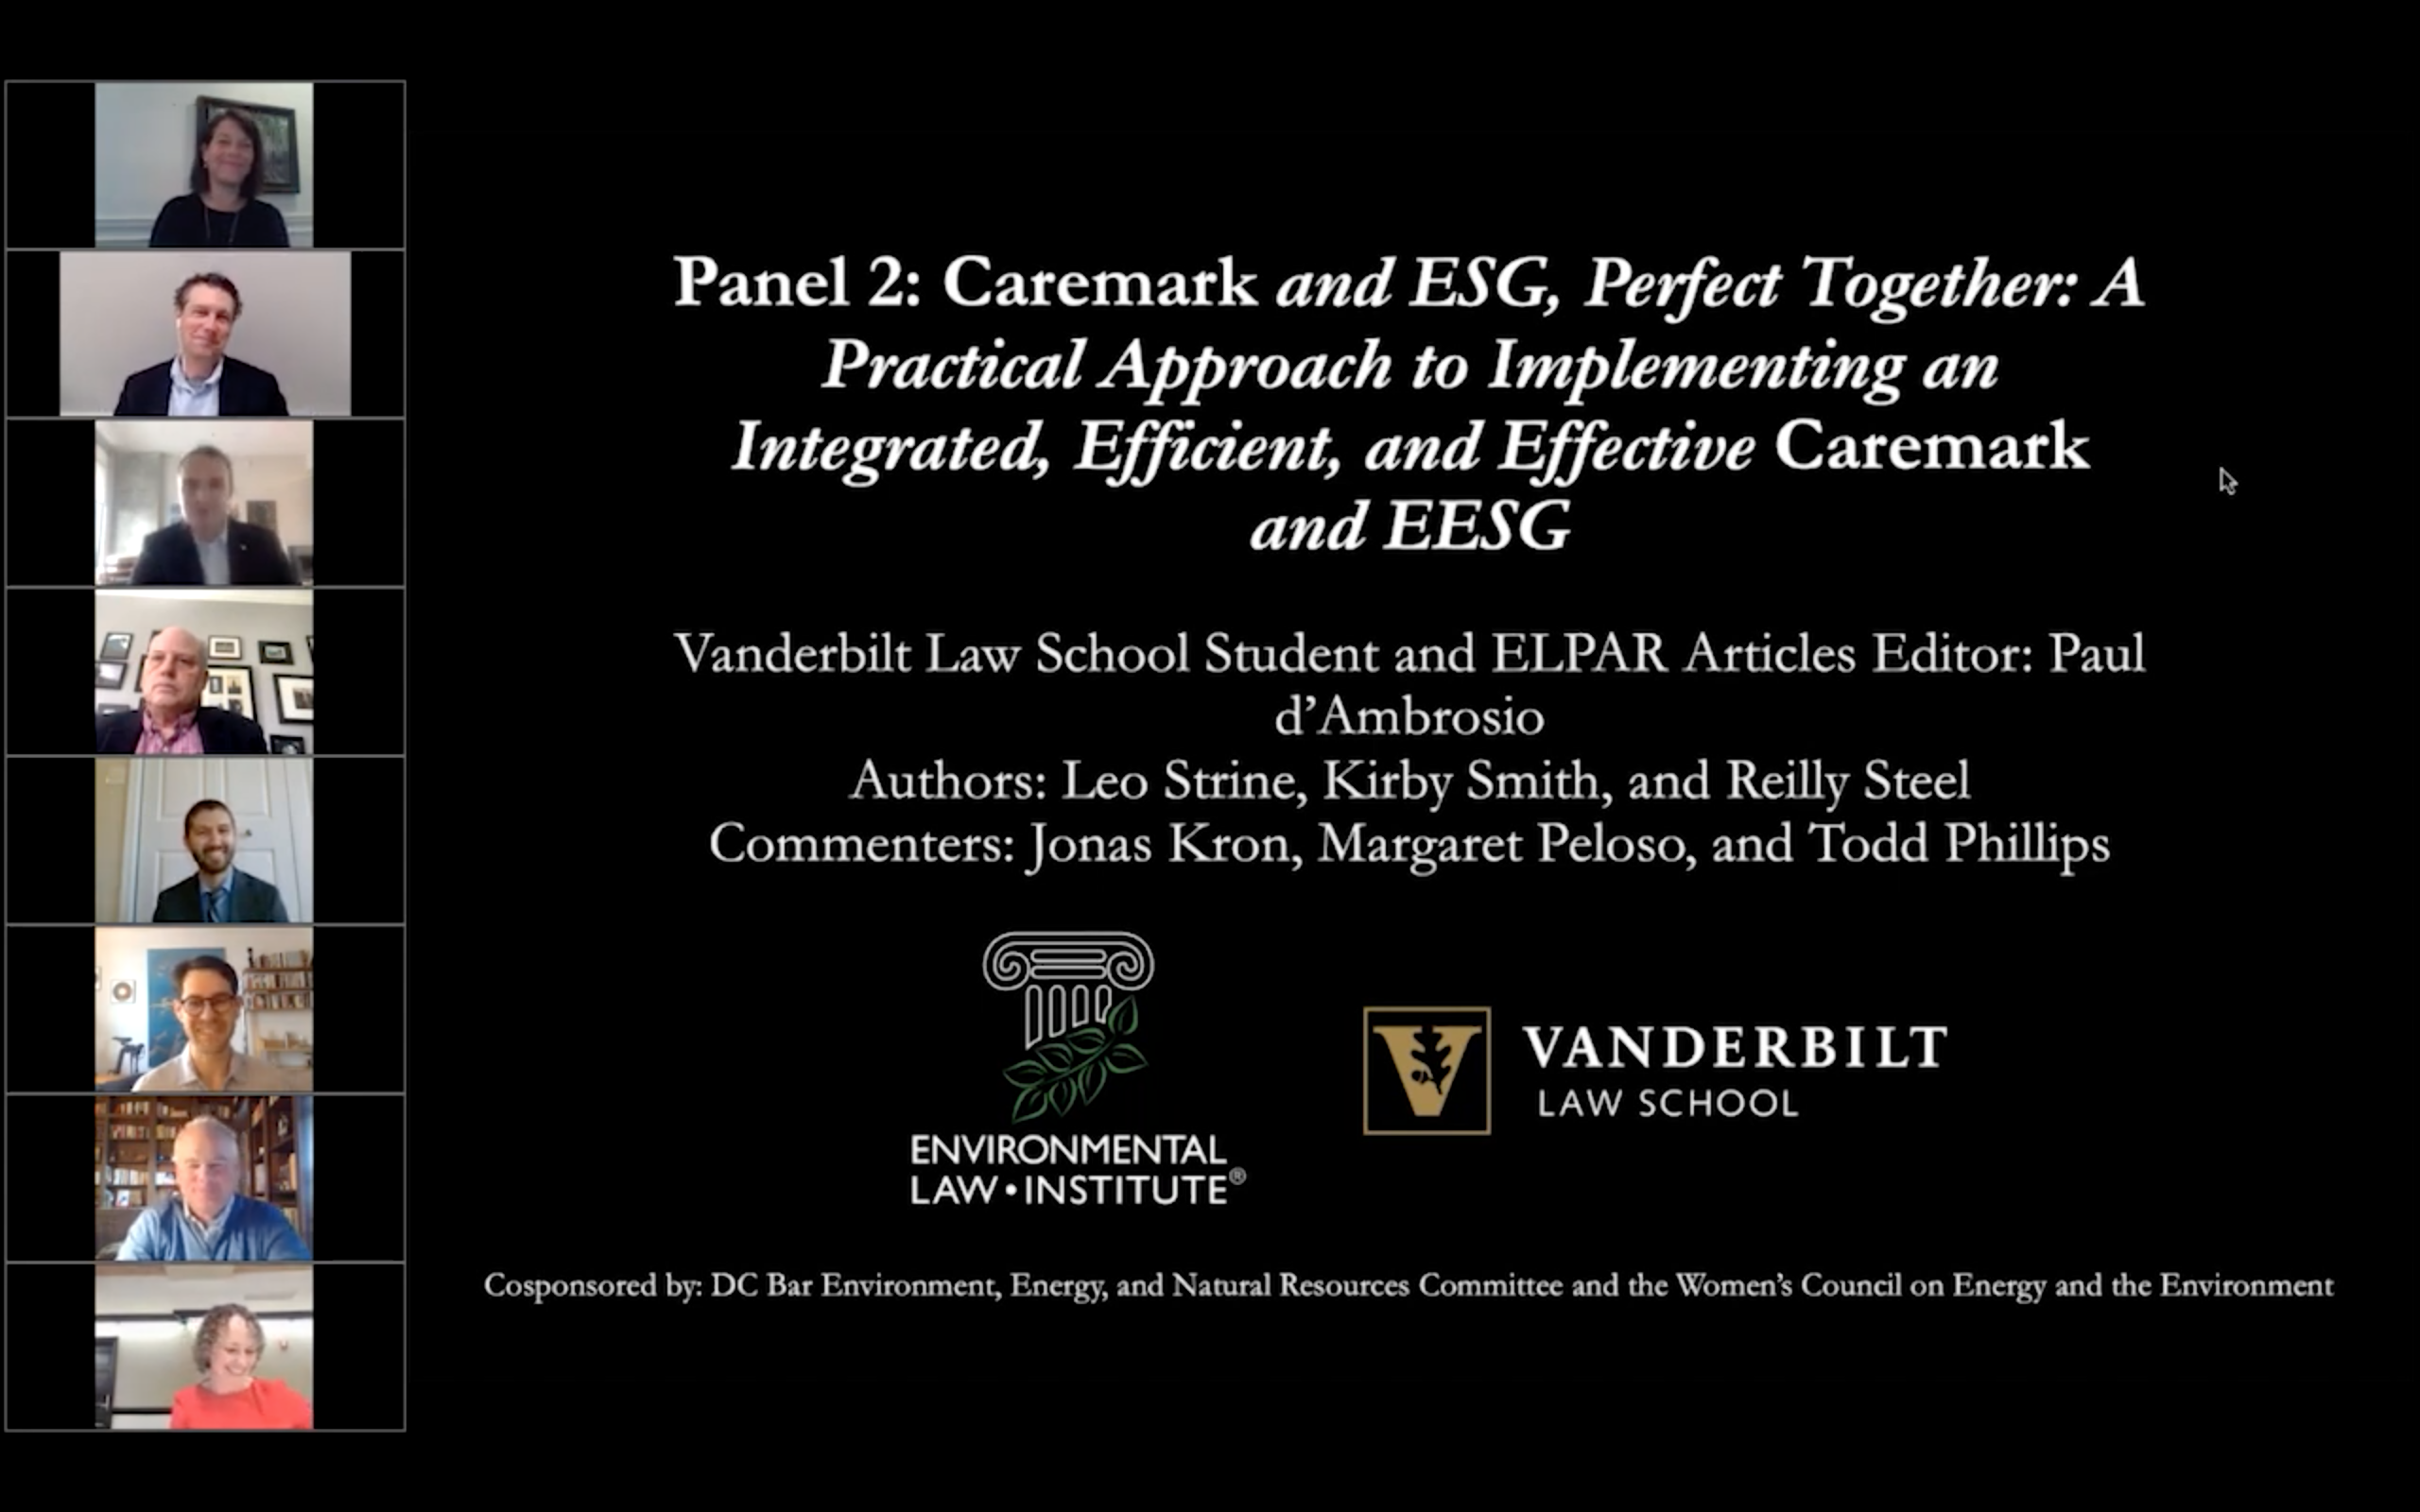 Screenshot of panel two title page and panelists